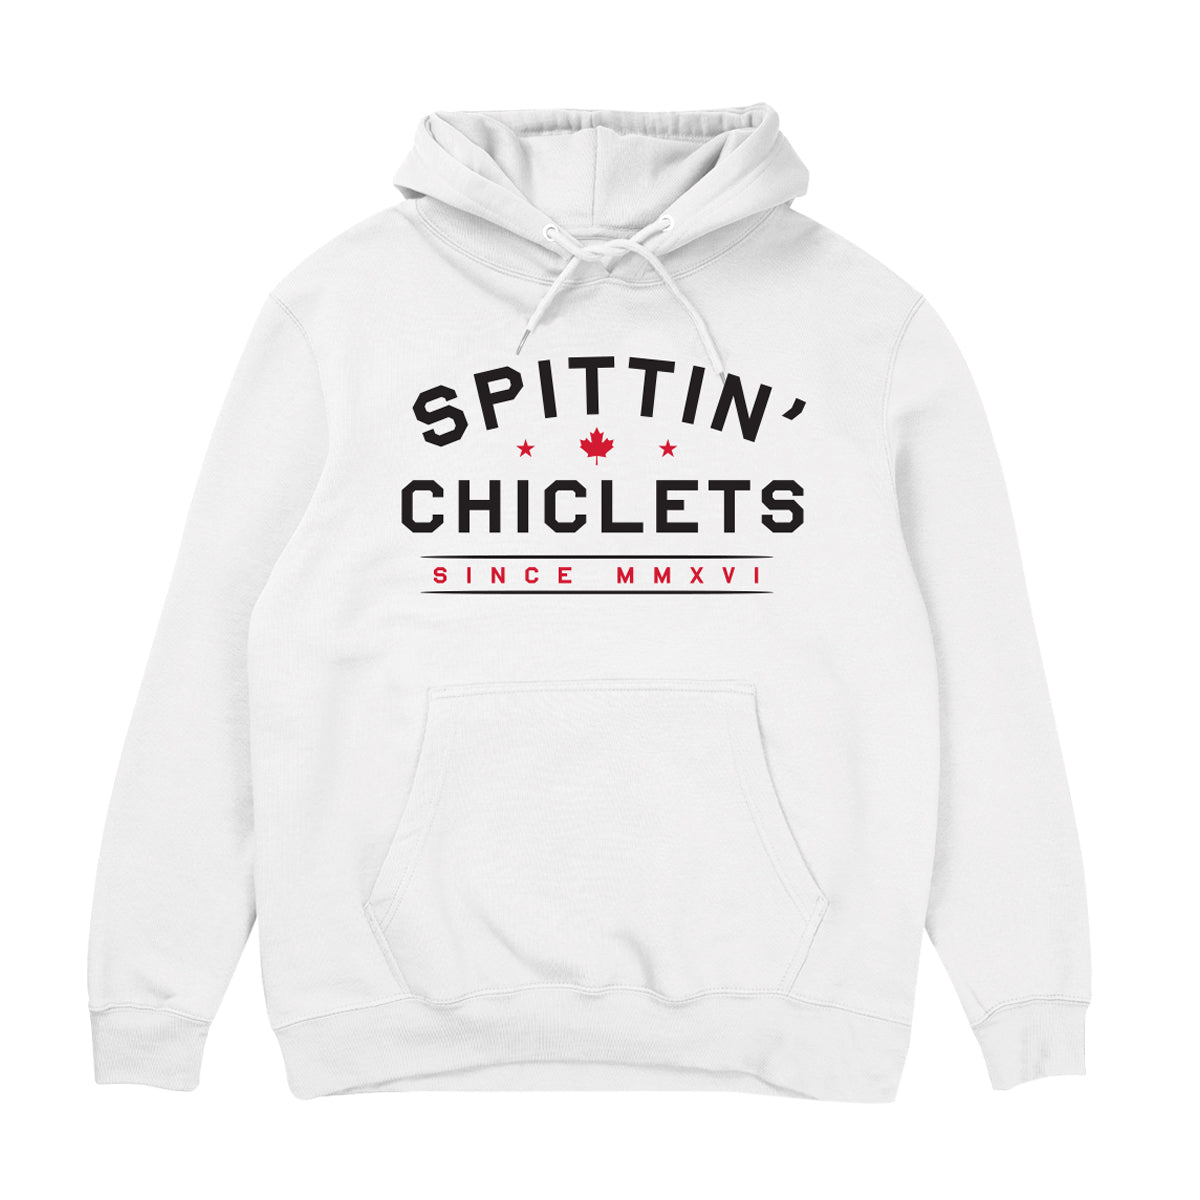 Spittin Chiclets Since MMXVI Hoodie